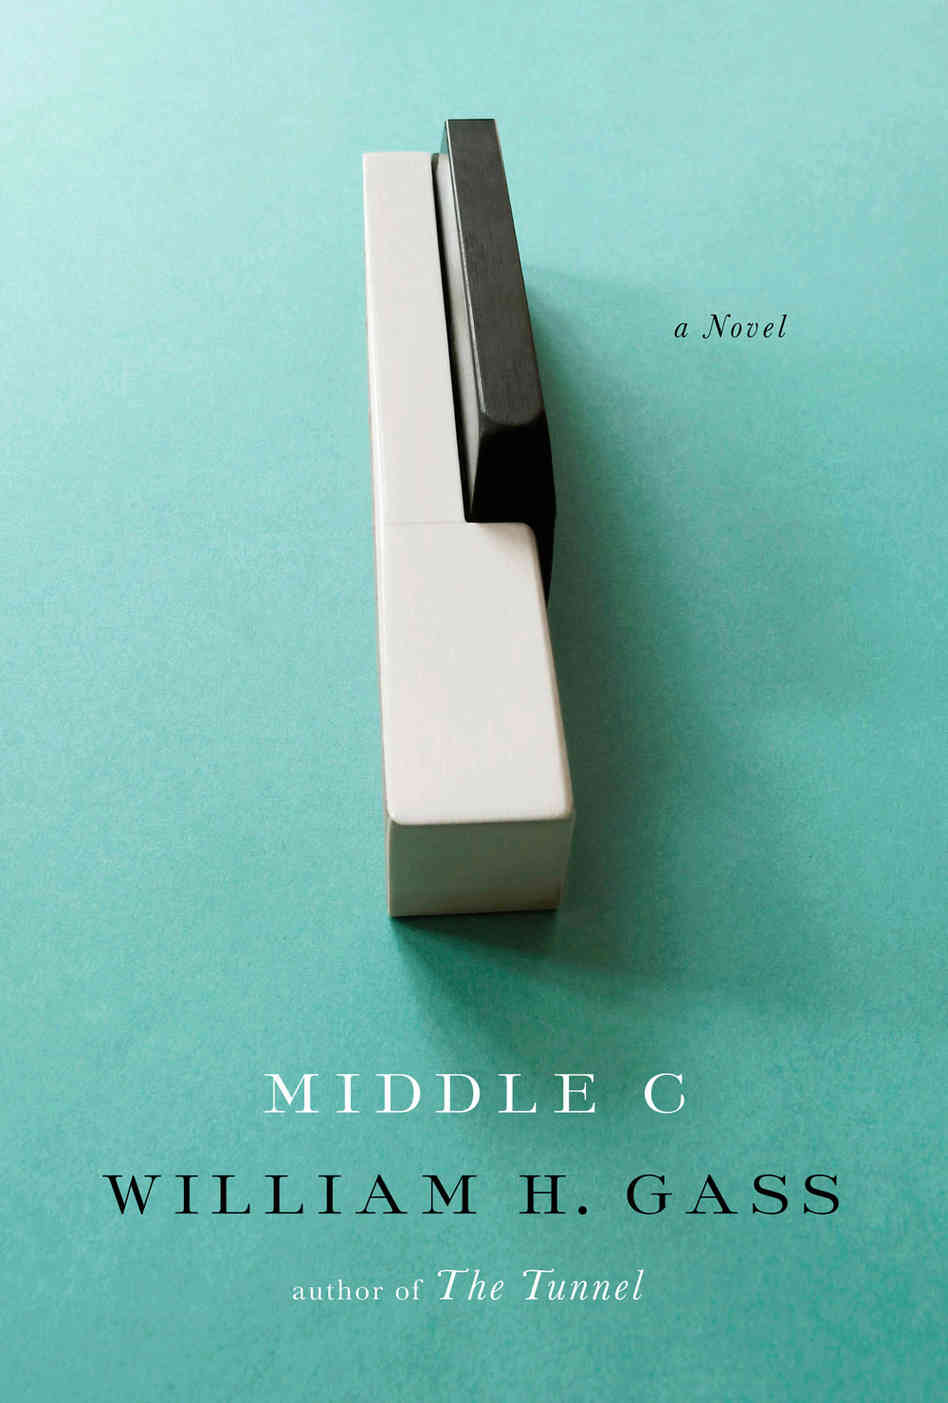 Middle C by William Gass